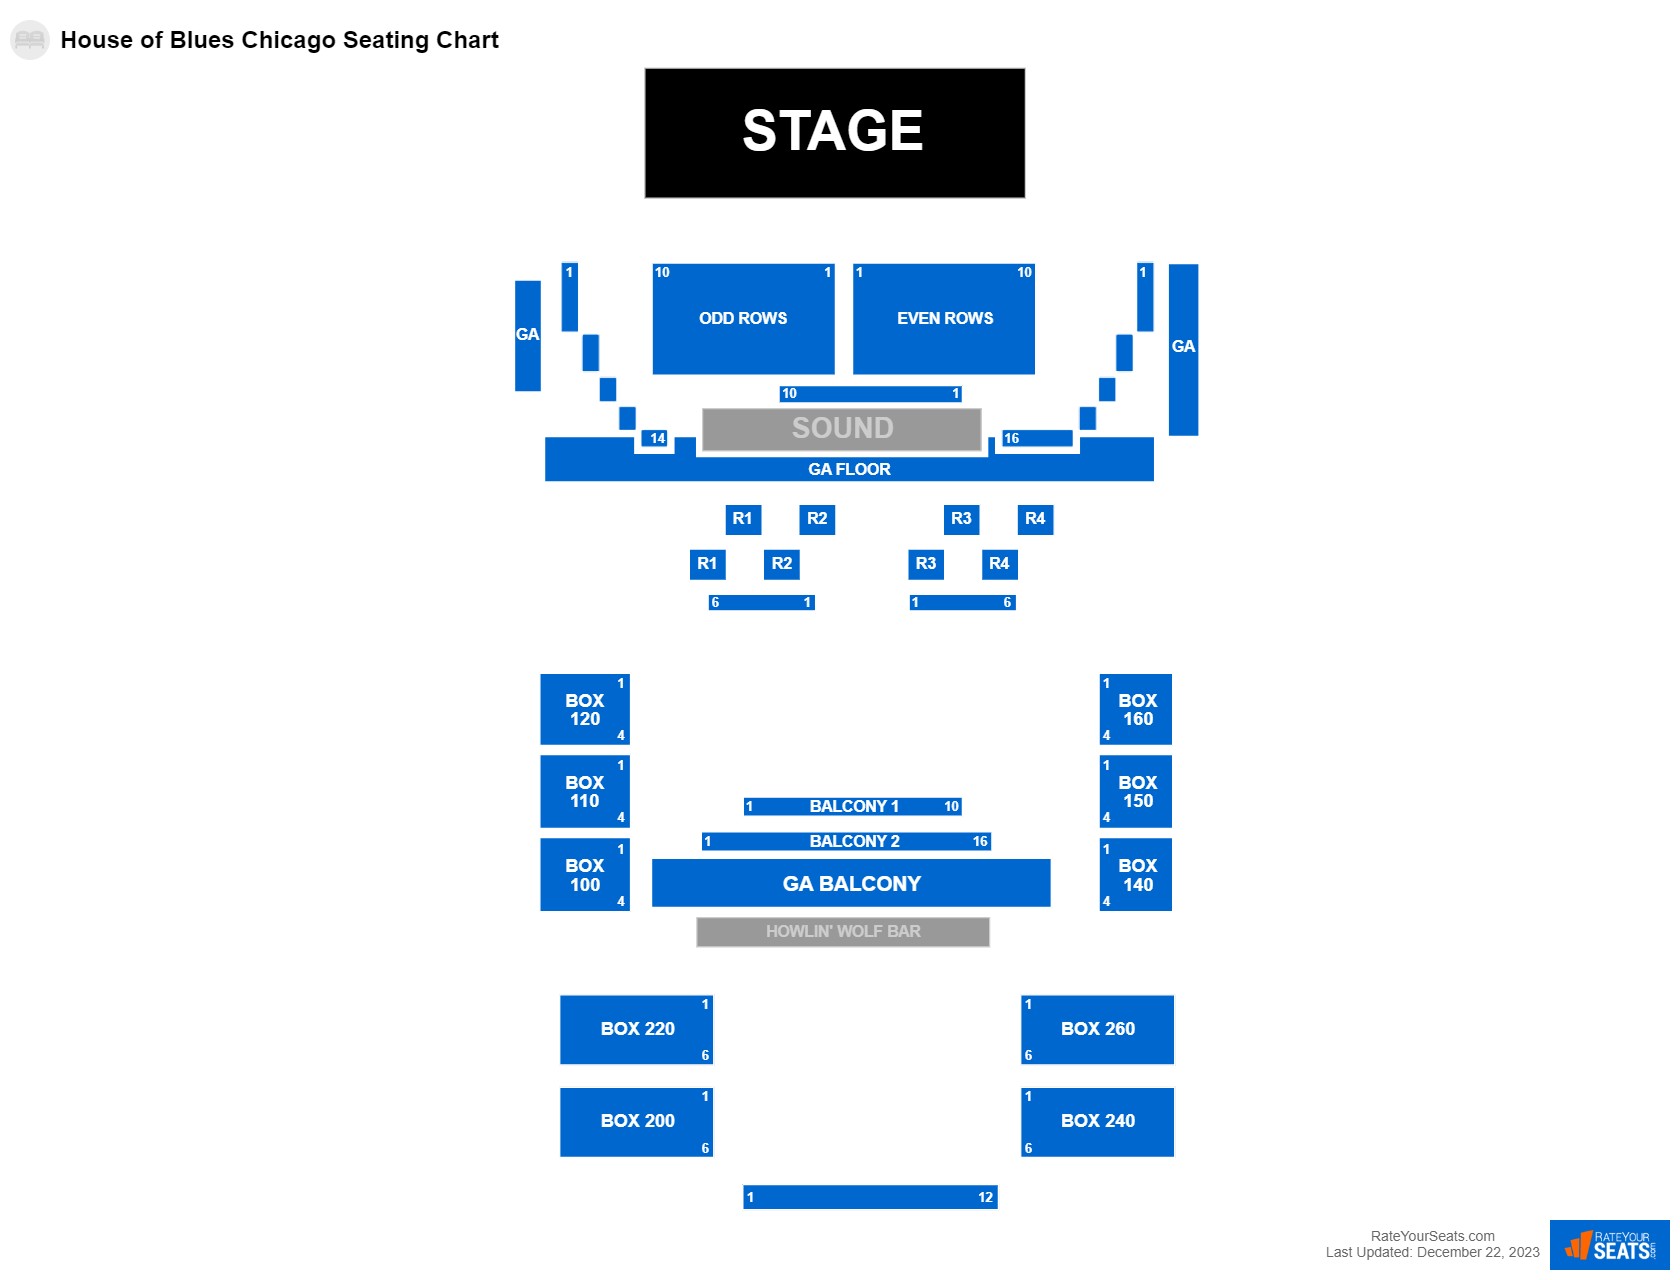 Concert seating chart at House of Blues Chicago